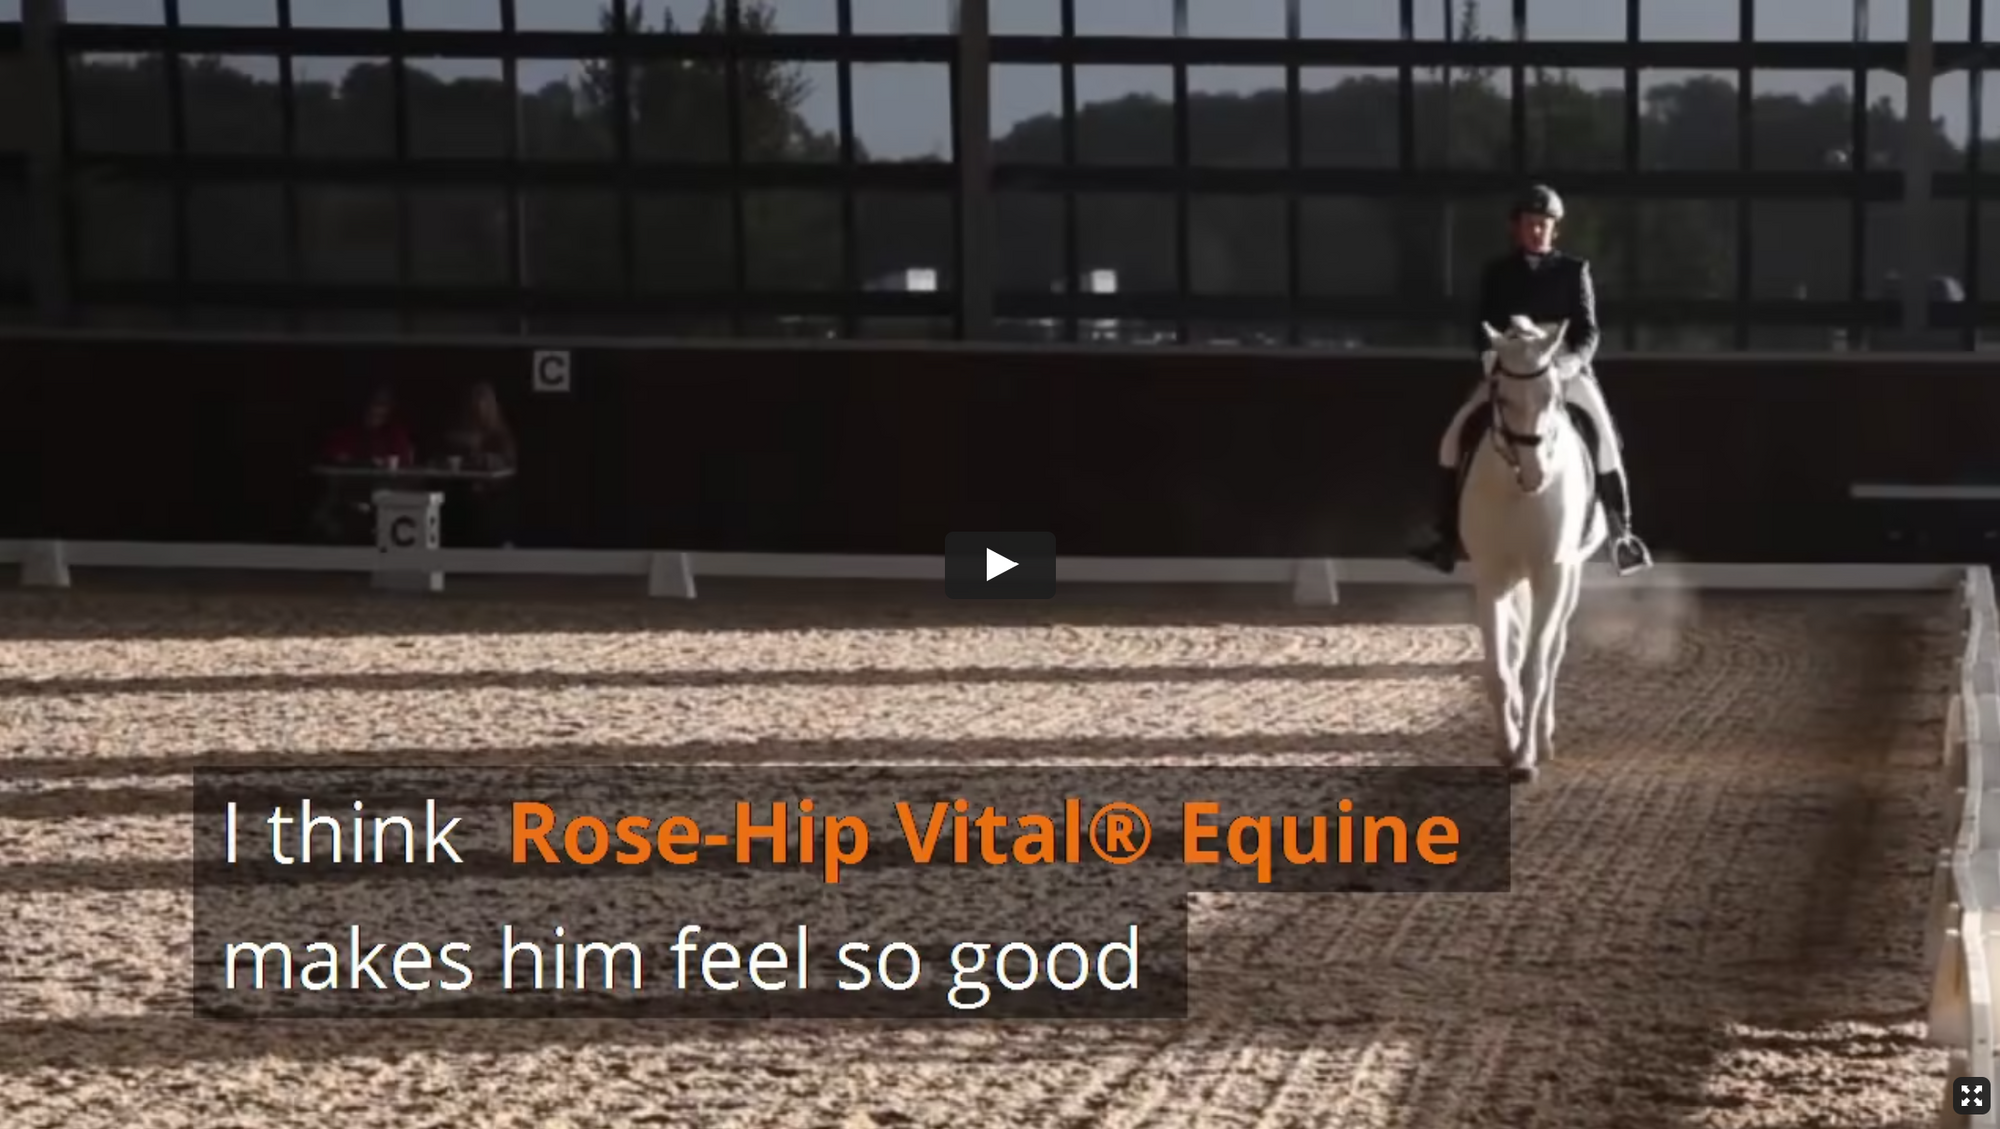 Learn why Louise Curran recommends Rose-Hip Vital Equine